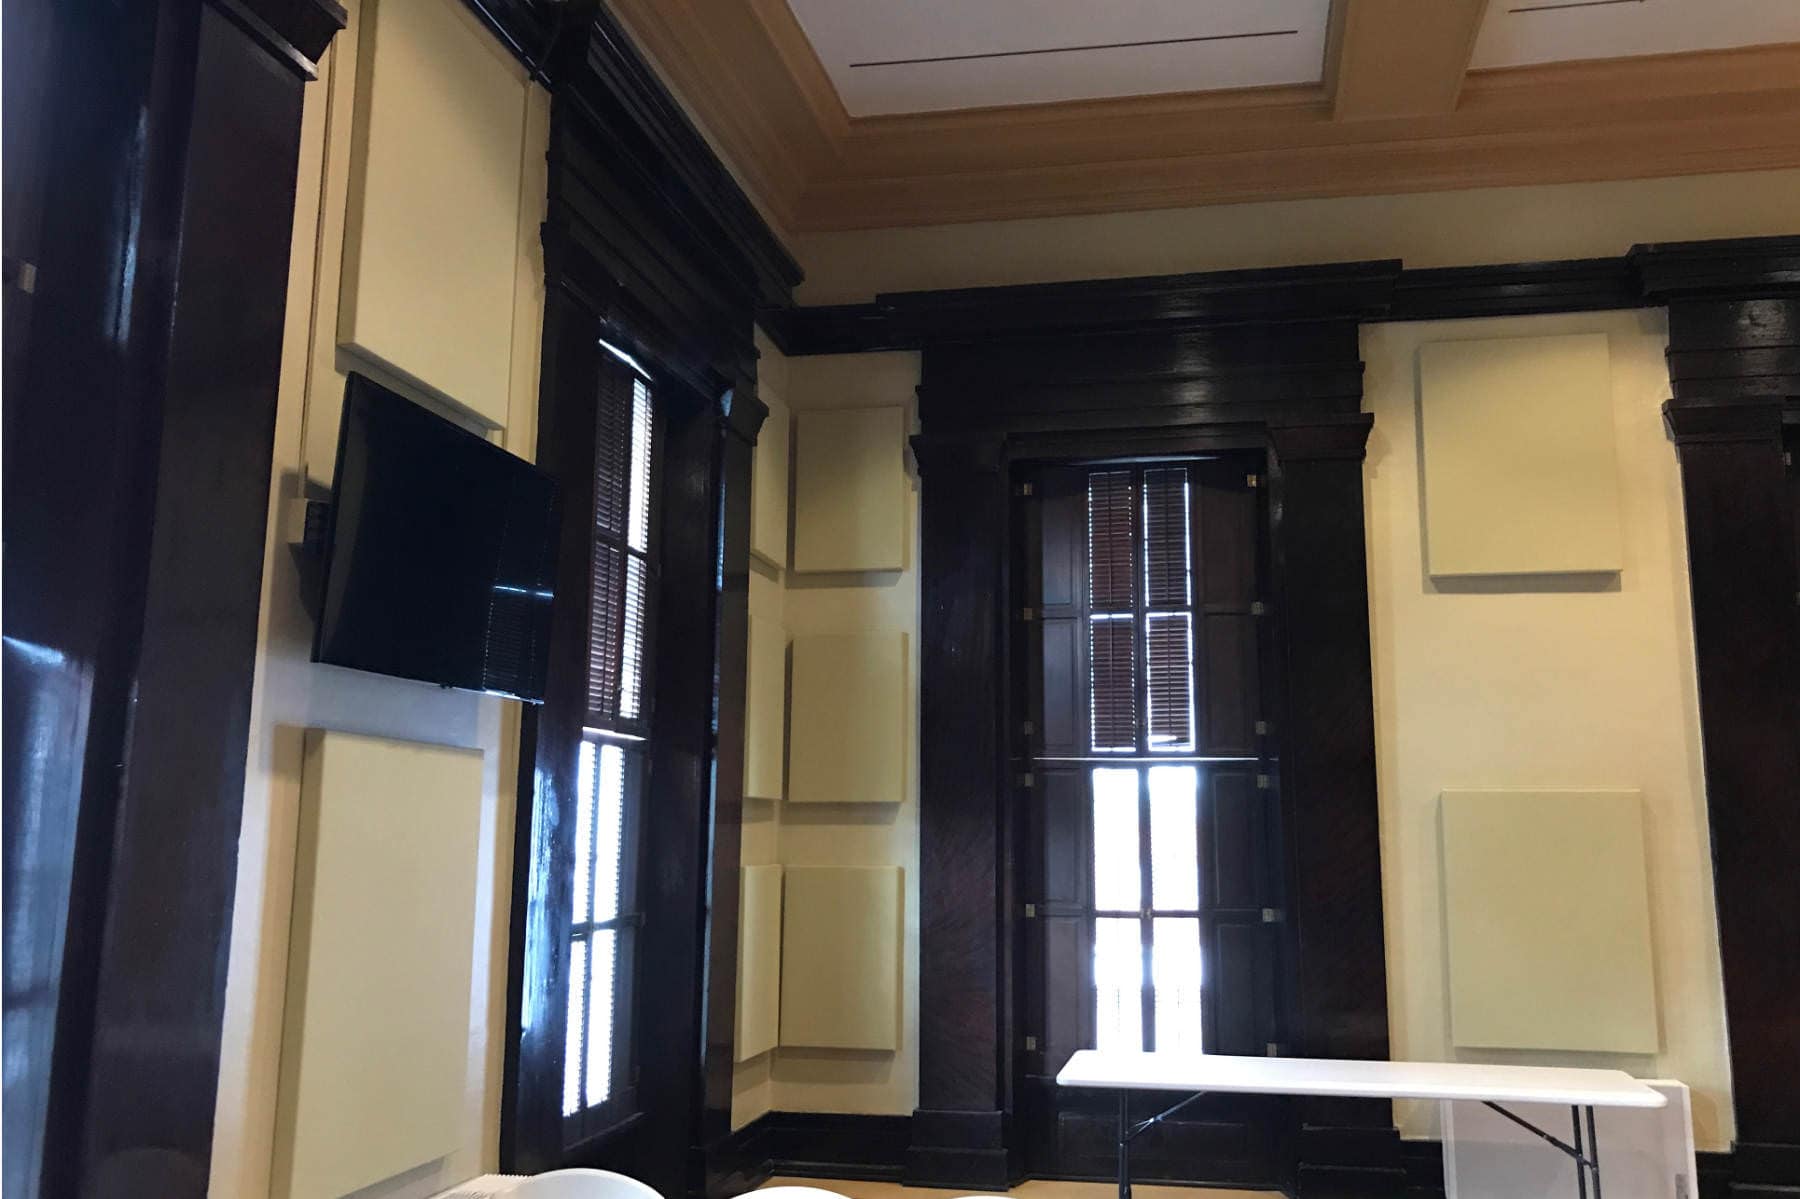 Standard Series acoustic panels in courthouse room